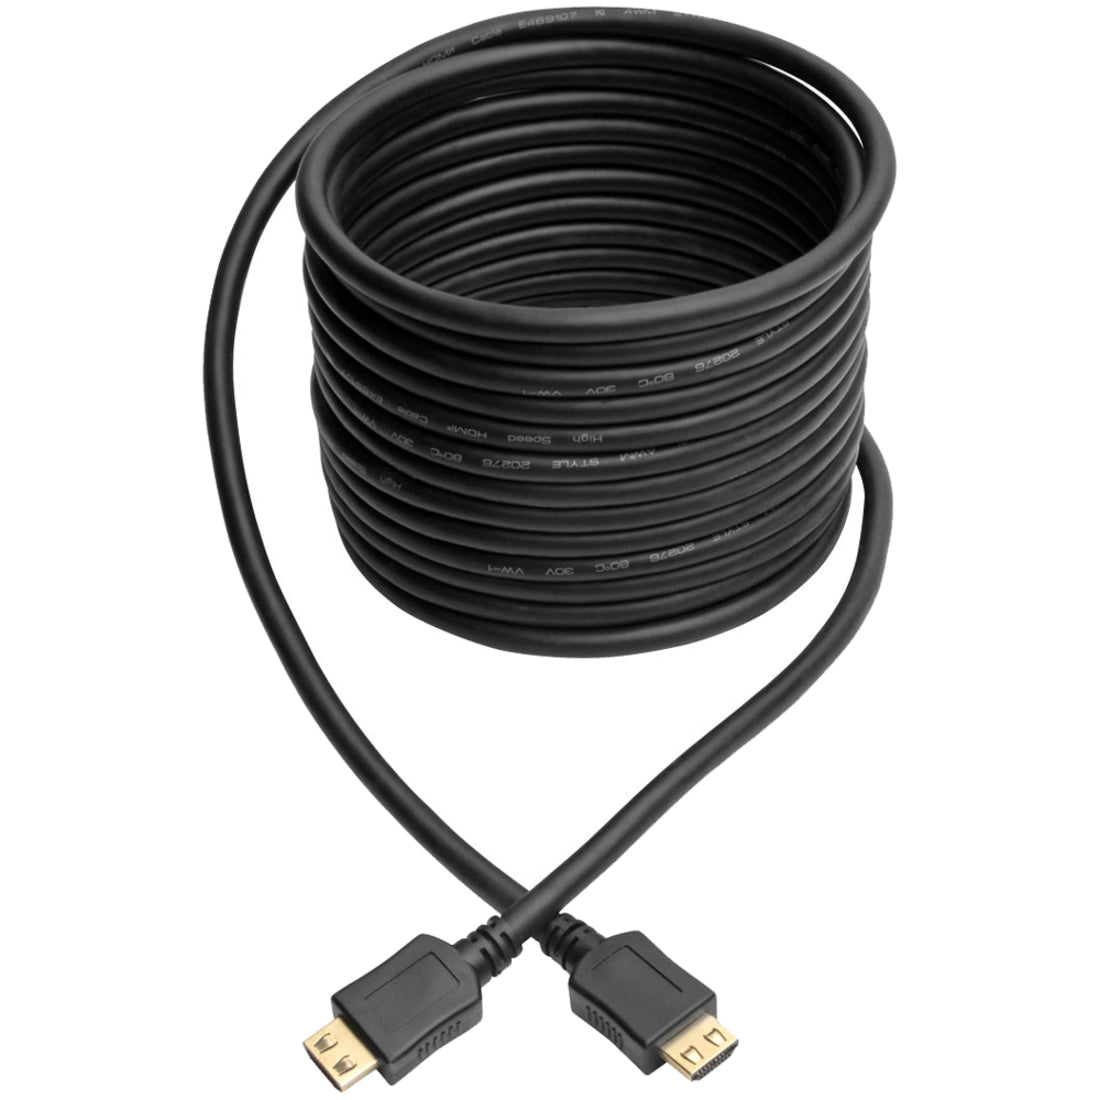 Tripp Lite P568-020-BK-GRP High-Speed HDMI Cable, 20 ft., with Gripping Connectors, 1080p, Black